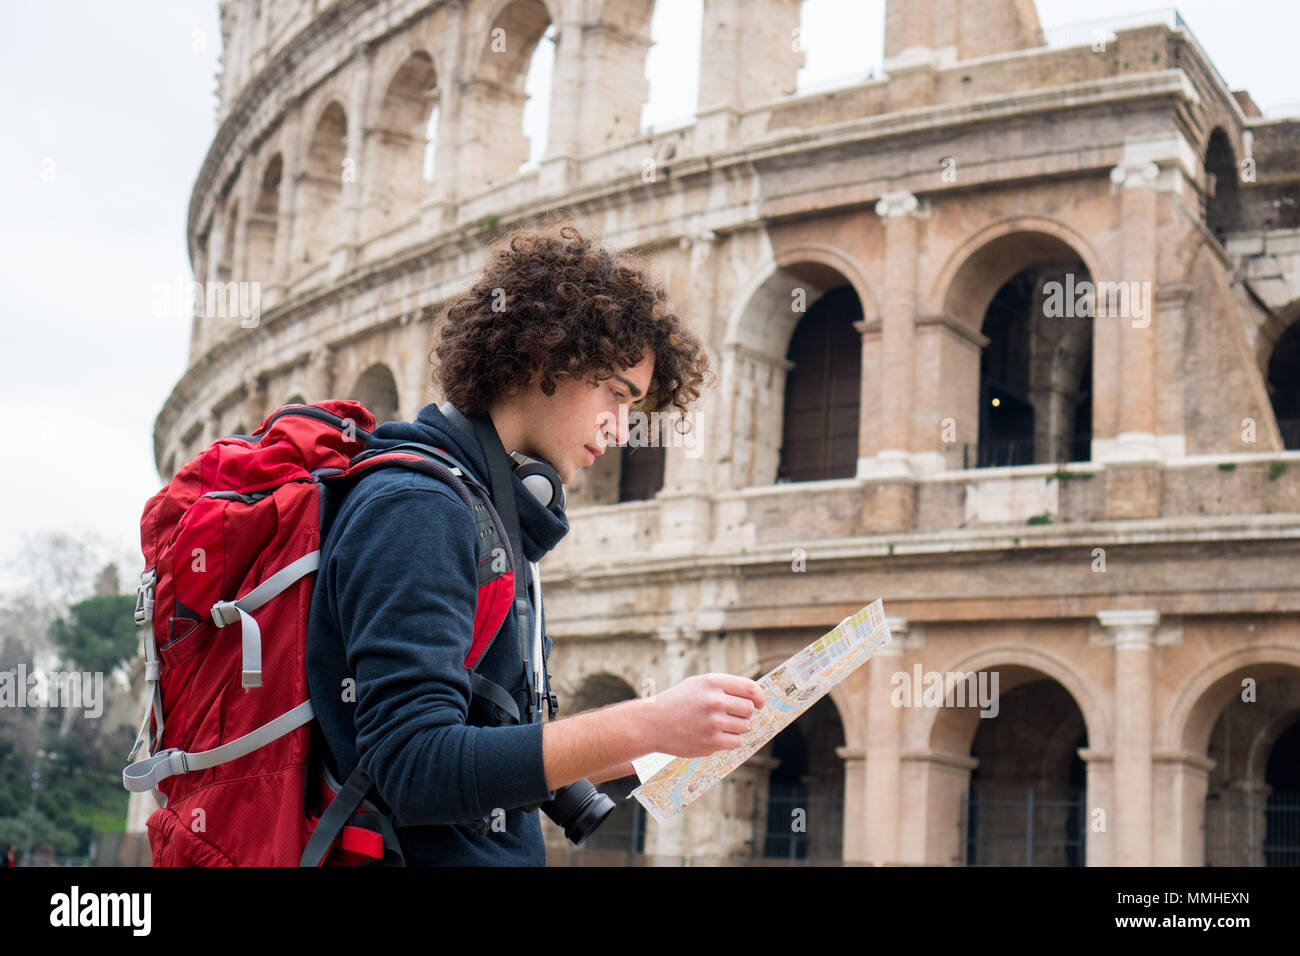 Handsome young traveler looking at tourist map in Rome in front of Colosseum. Backpacker with camera and tourist map Stock Photo